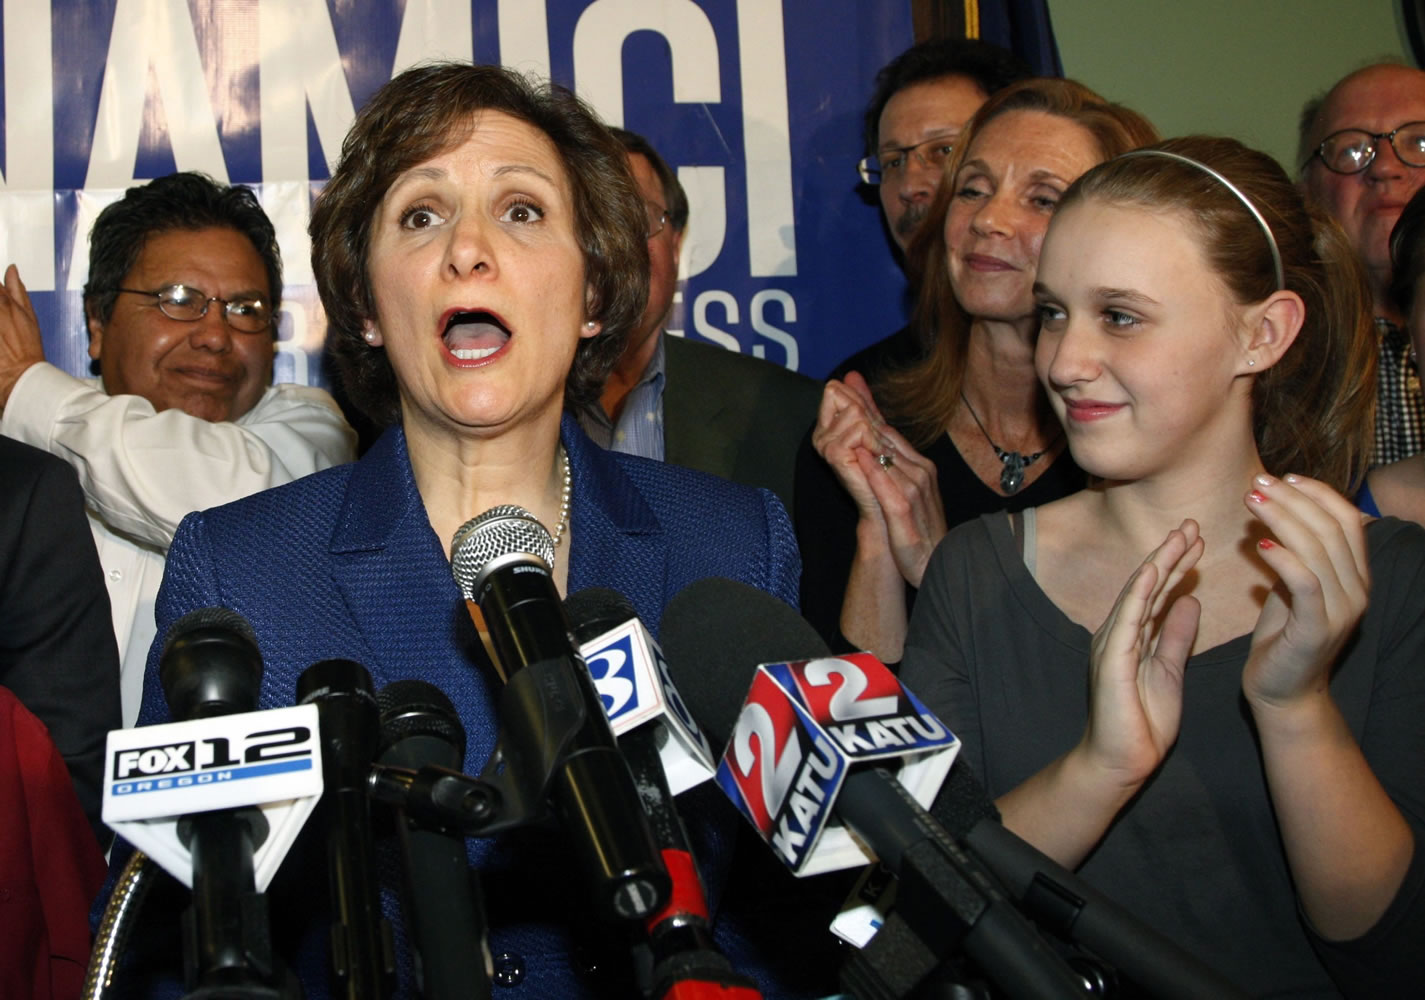 Democrat Suzanne Bonamici celebrates after winning the special election for Oregon's First Congressional District against Republican Rob Cornilles on Tuesday.